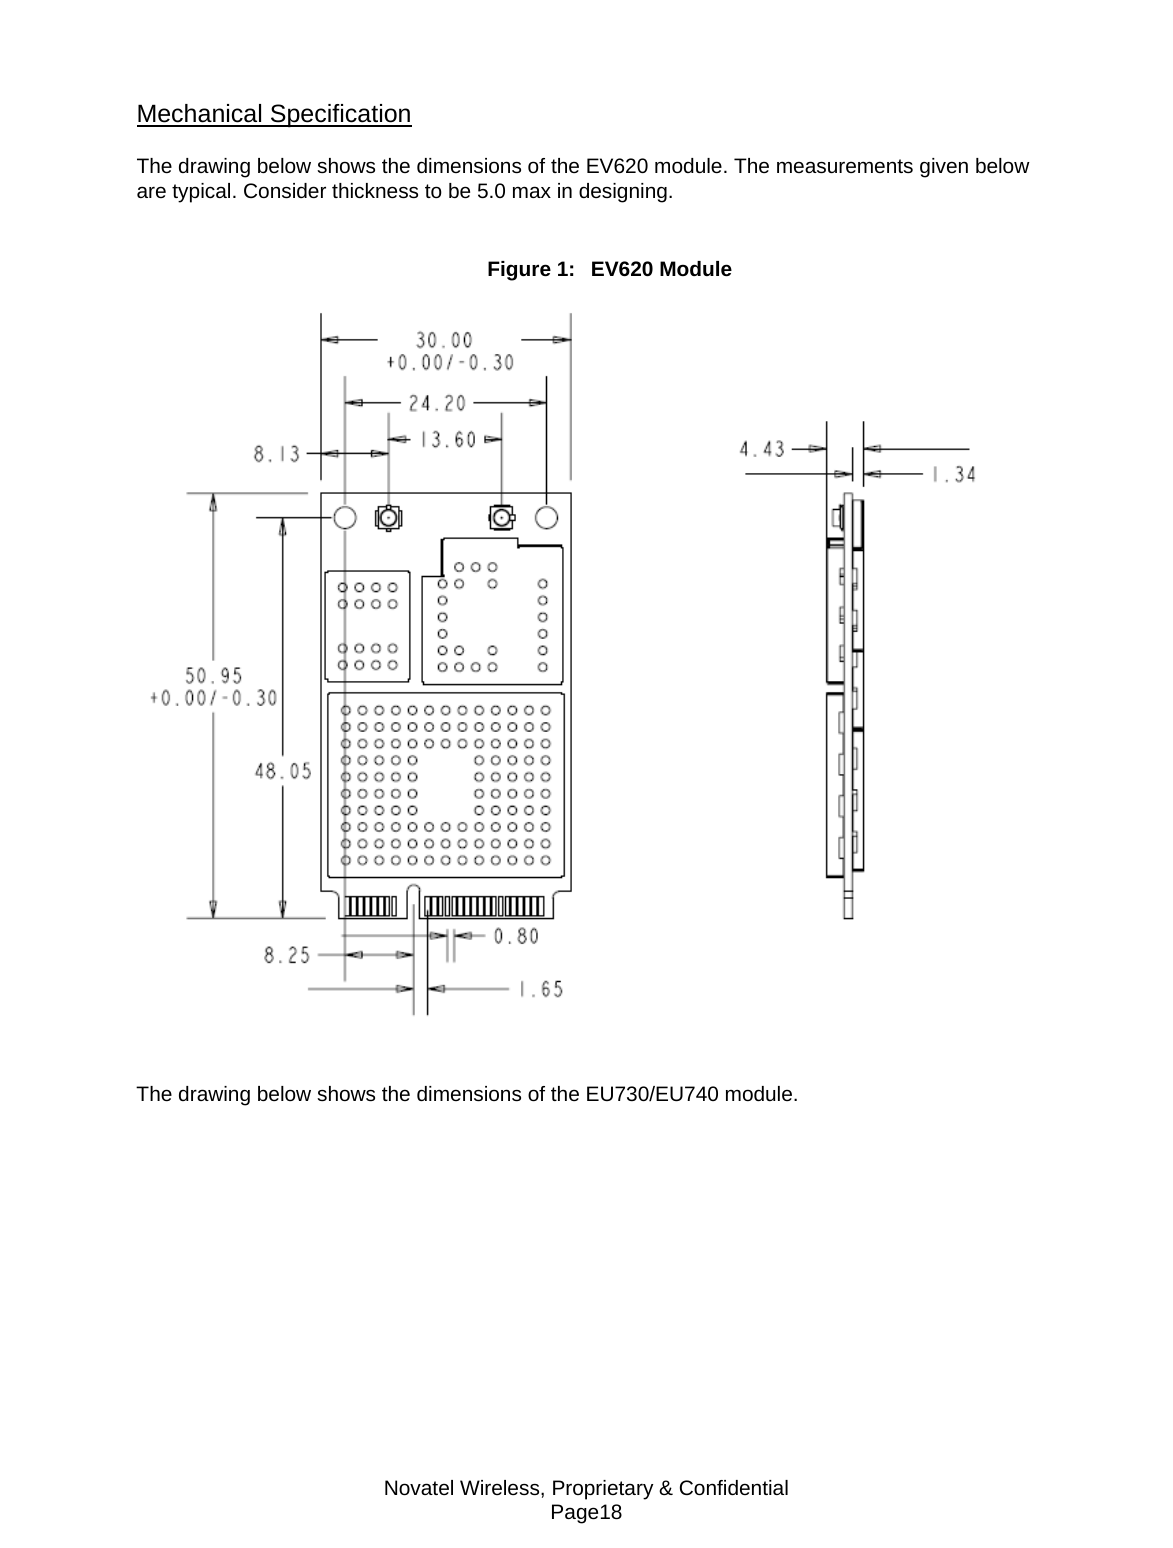 Novatel Wireless, Proprietary &amp; Confidential Page18 Mechanical Specification  The drawing below shows the dimensions of the EV620 module. The measurements given below are typical. Consider thickness to be 5.0 max in designing. Figure 1:  EV620 Module   The drawing below shows the dimensions of the EU730/EU740 module.   